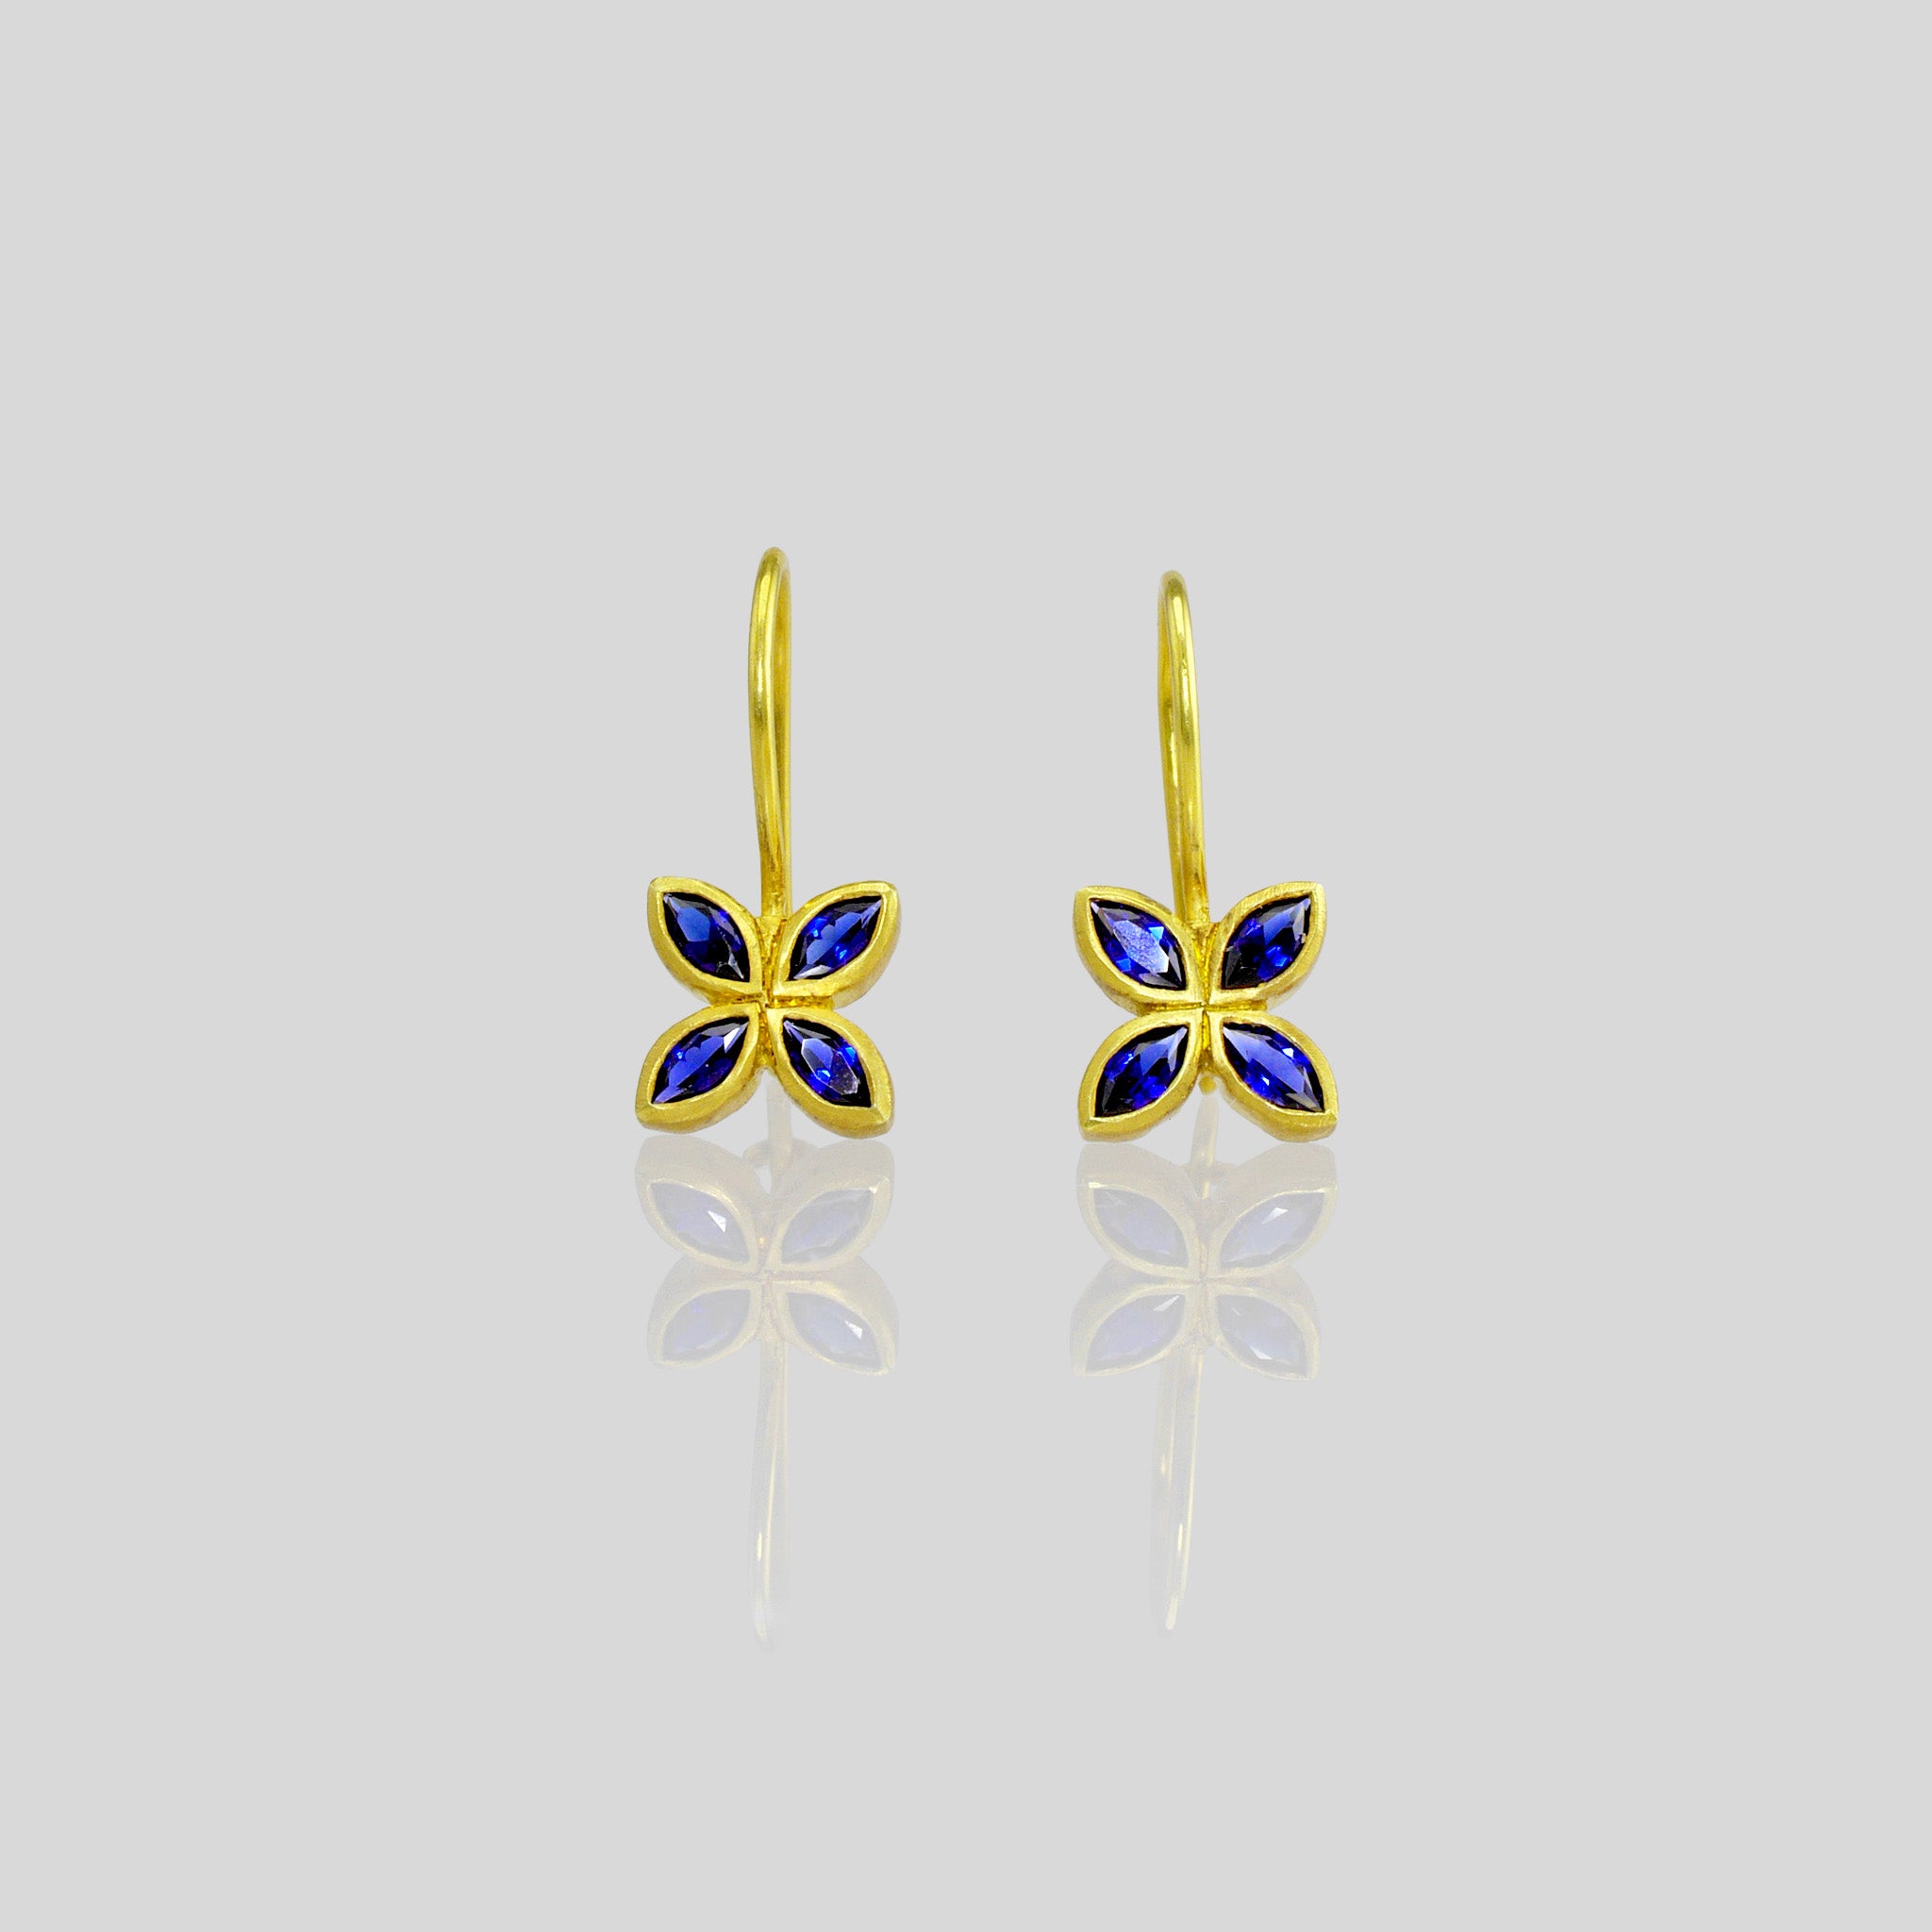 Close up of Dazzling Sapphire flower earrings, crafted from 4 marquise gemstones. Lightweight, colorful and vibrant.